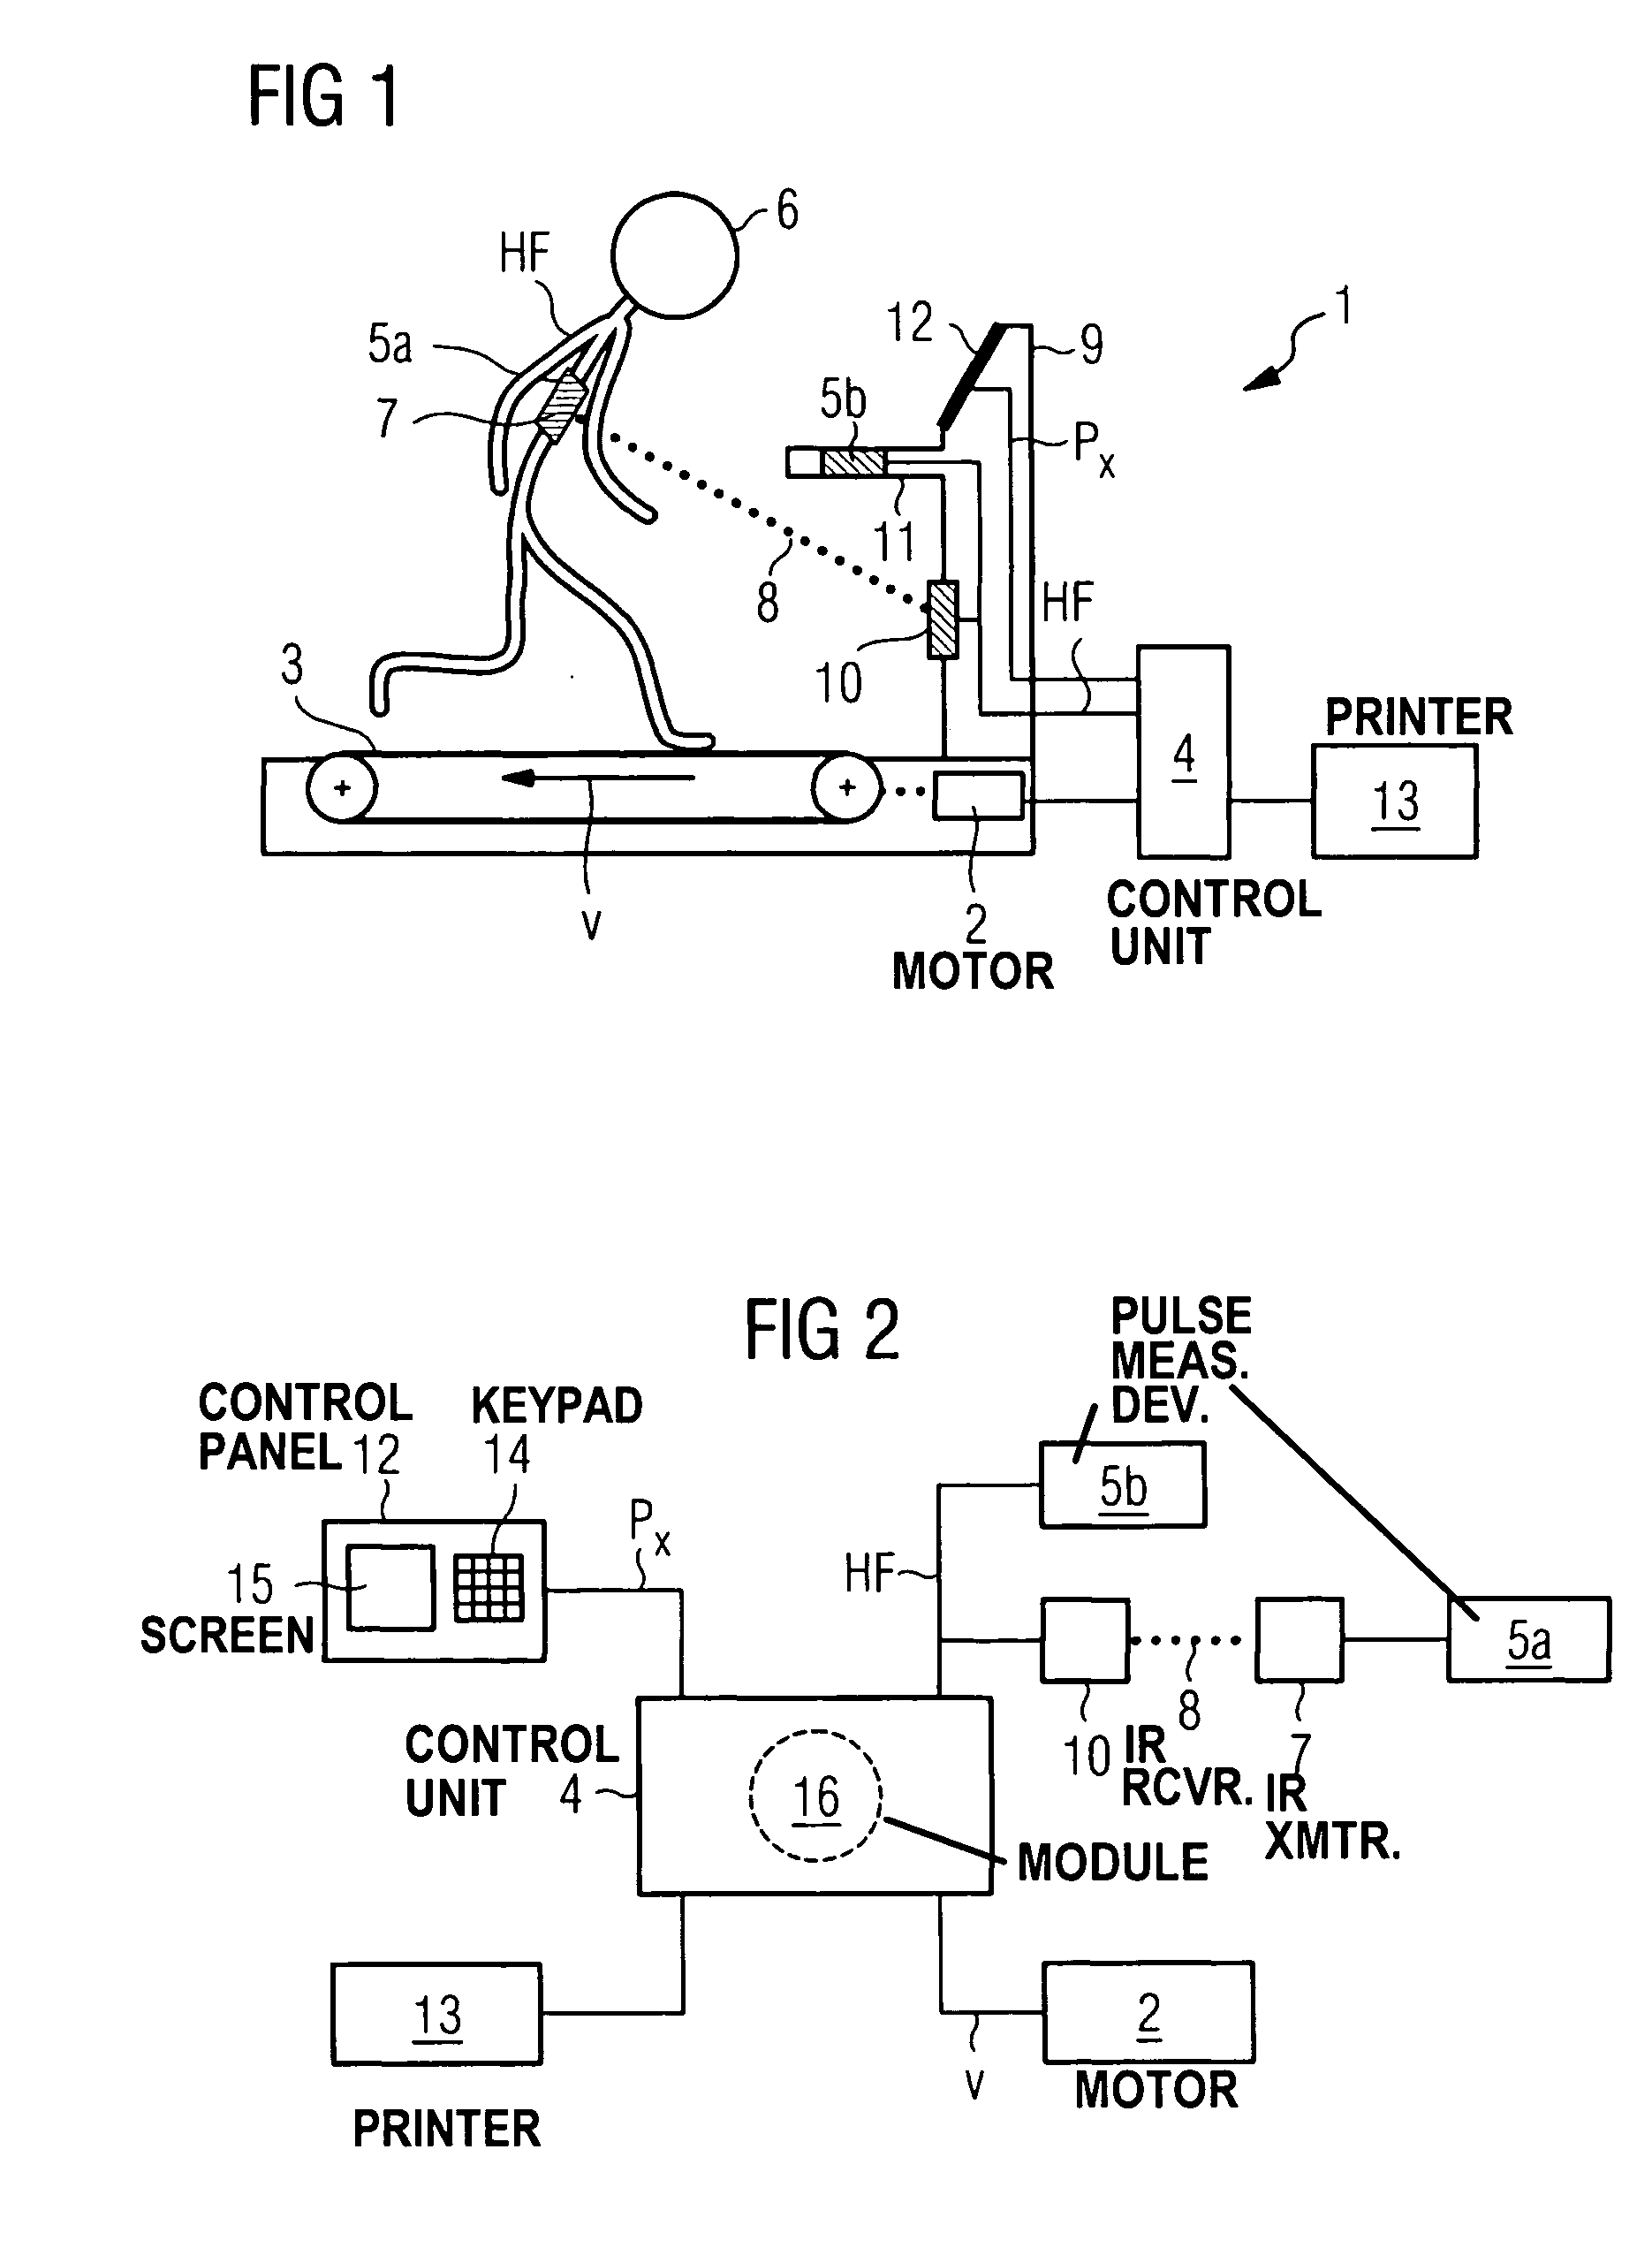 Apparatus and method for training adjustment in sports, in particular in running sports